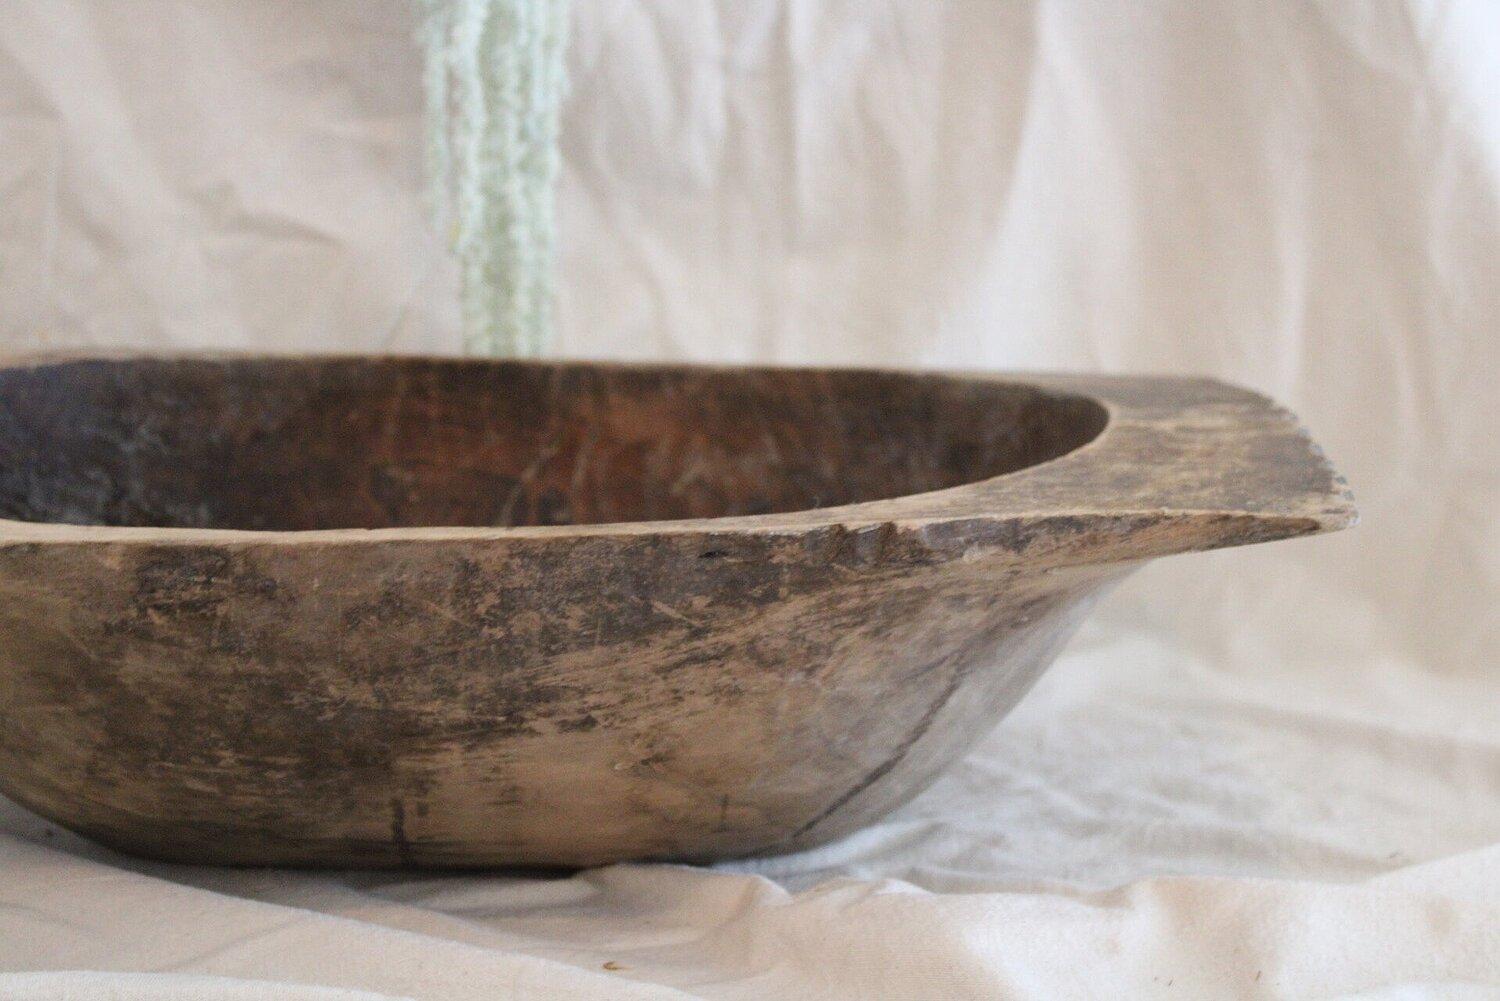 My favourite style of vessel to adorn your fruits, vegetables and more. The perfect accompaniment to your counters, shelves and tables. Also looks good empty as is. Hand carved primitive details. 


Sold in its wabi sabi (perfectly imperfect) state.